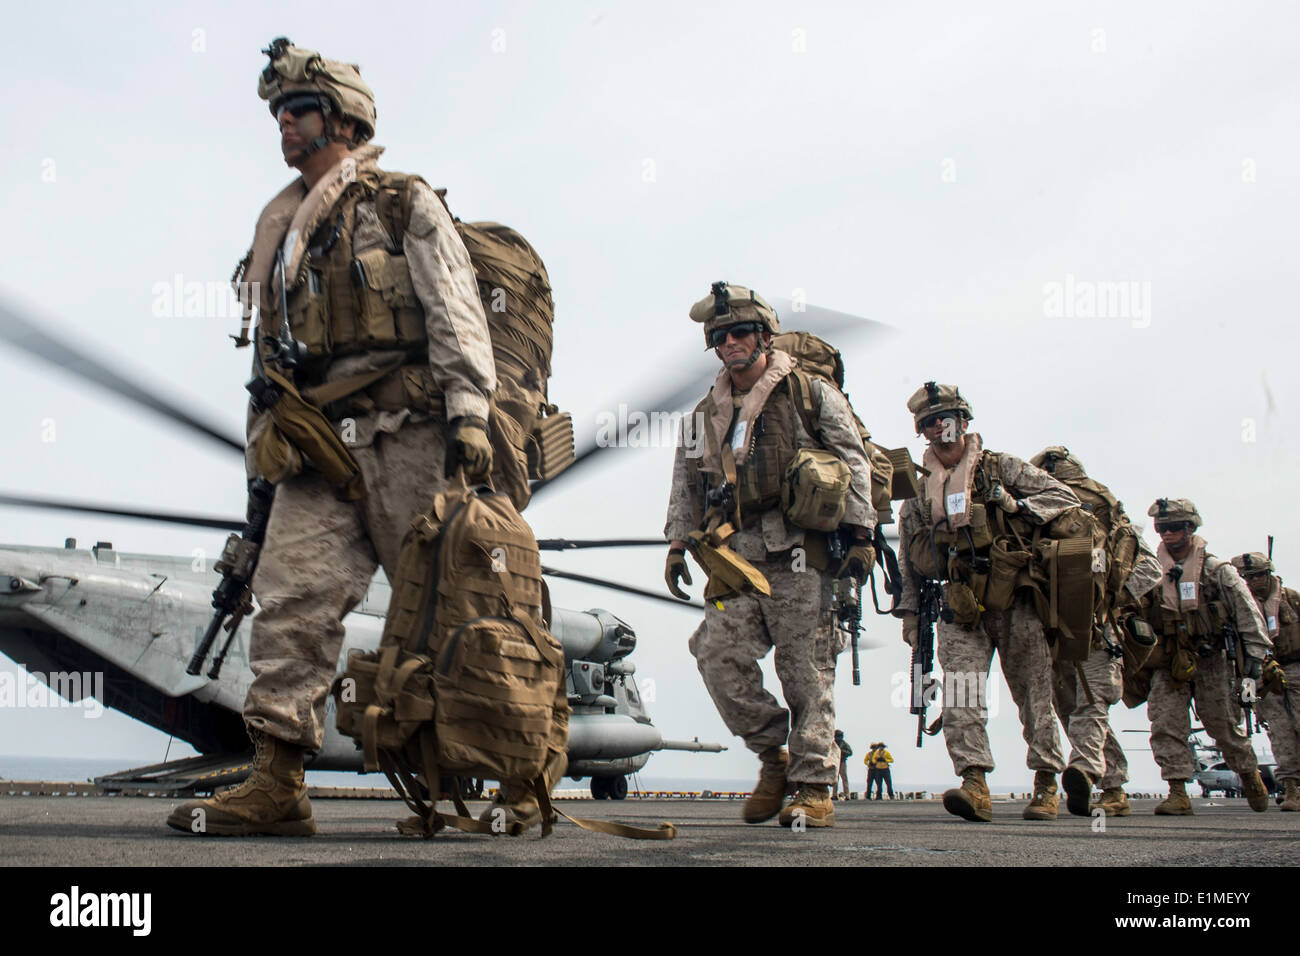 U.S. Marines assigned to the 13th Marine Expeditionary Unit prepare to board a CH-53E Super Stallion helicopter on the amphibio Stock Photo